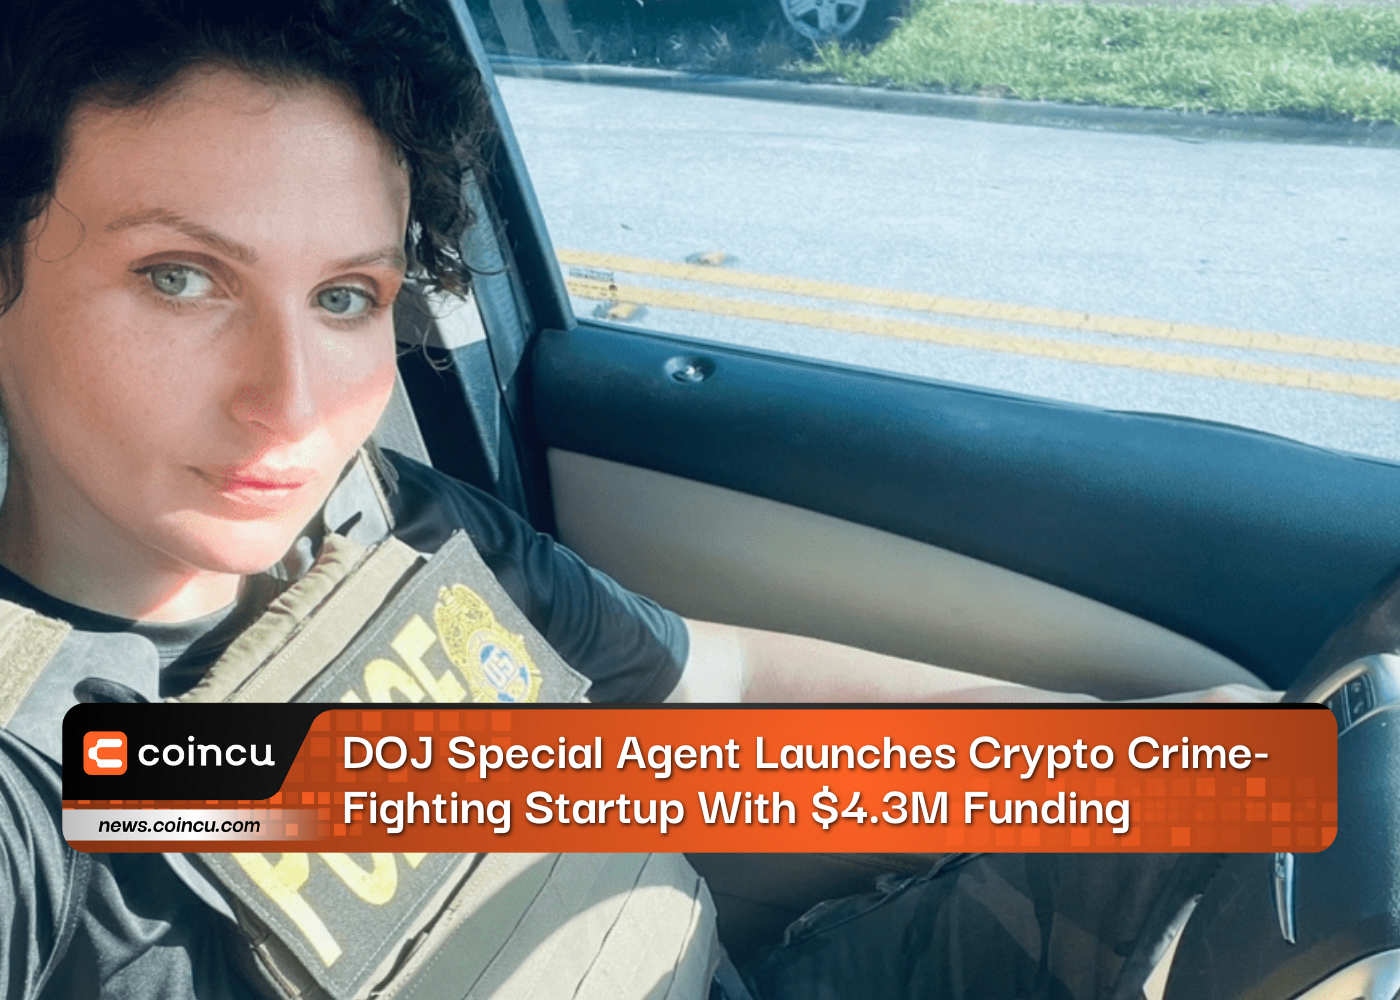 DOJ Special Agent Launches Crypto Crime-Fighting Startup With $4.3M Funding